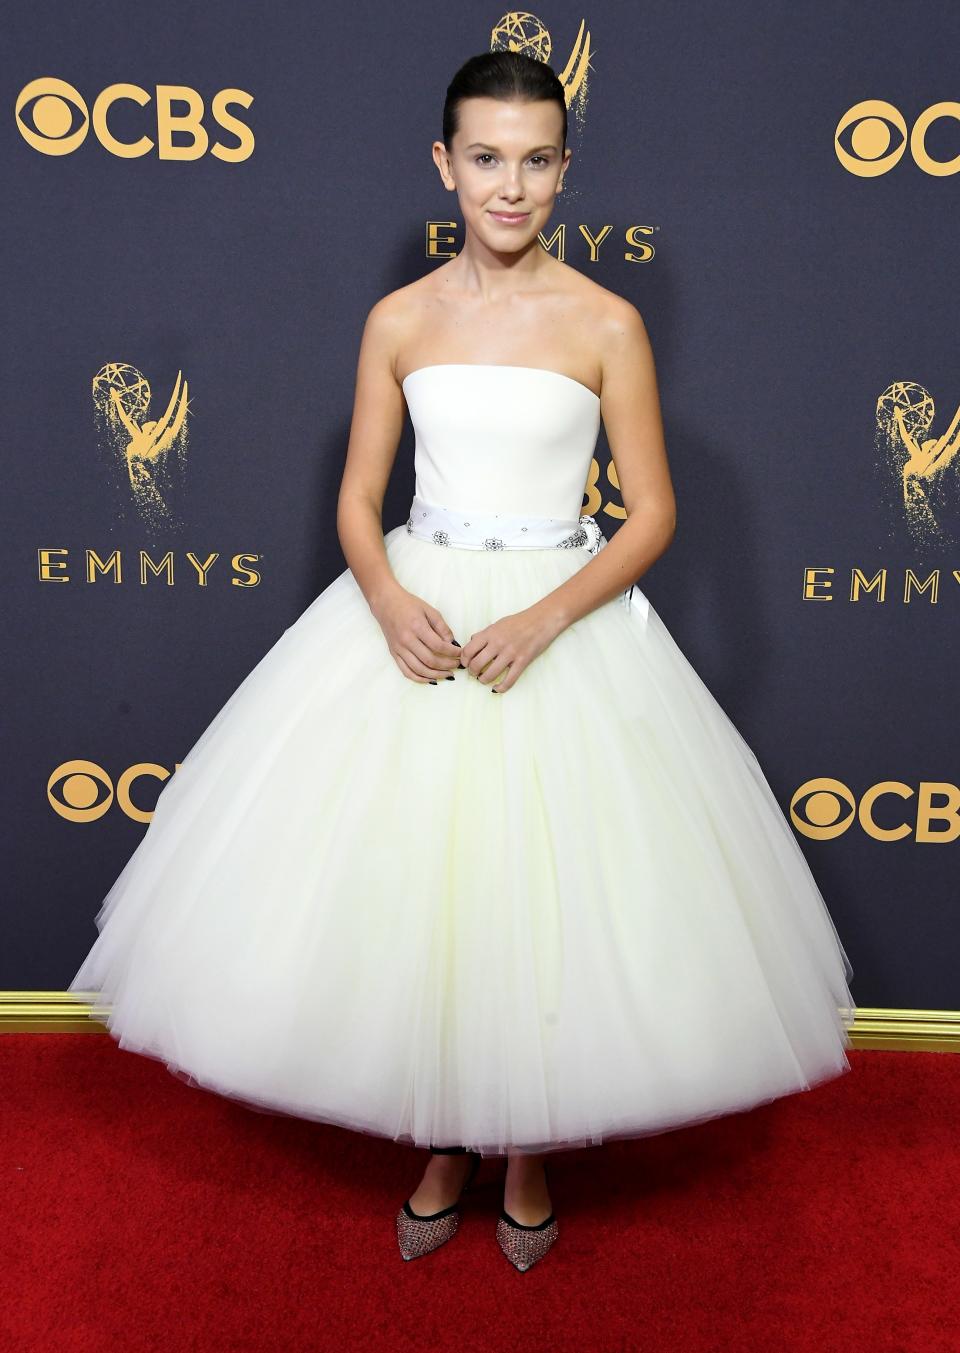 At the 69th Emmy Awards, September 2017